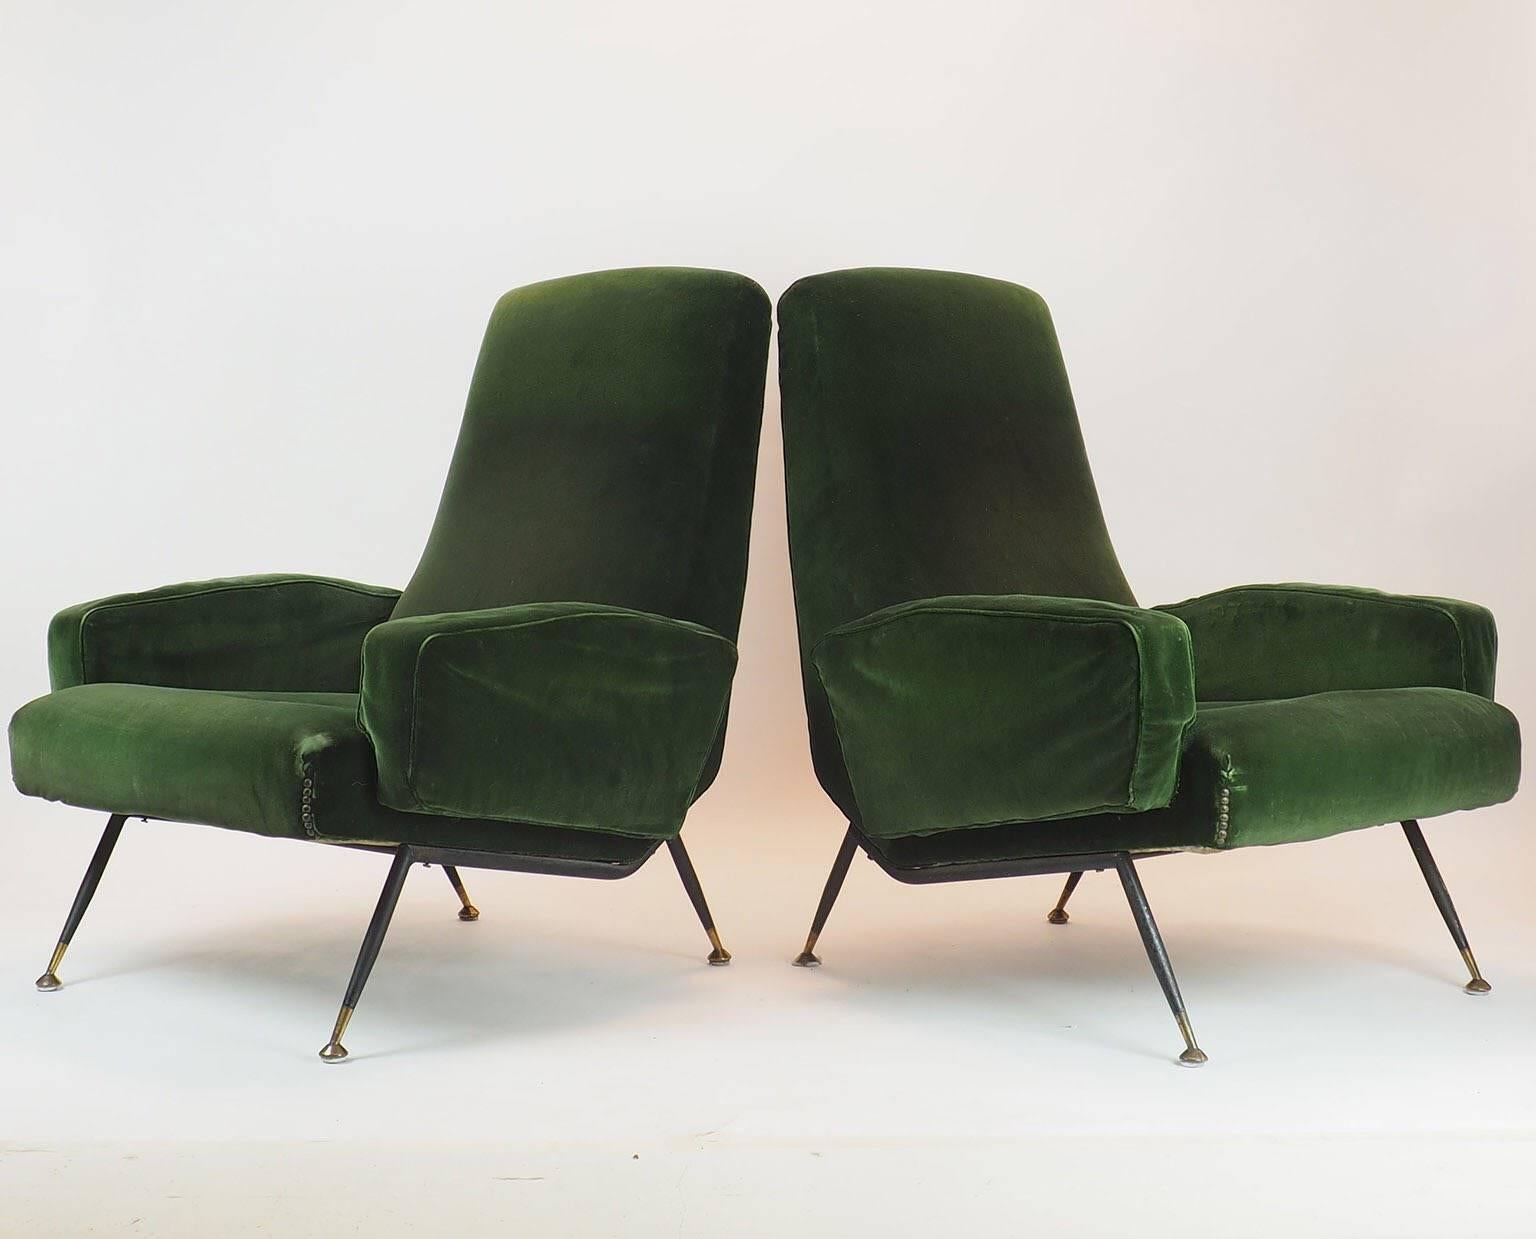 Brass Italian Armchairs, Comfort with Unusual and Unconventional Lines, Milano, 1950s